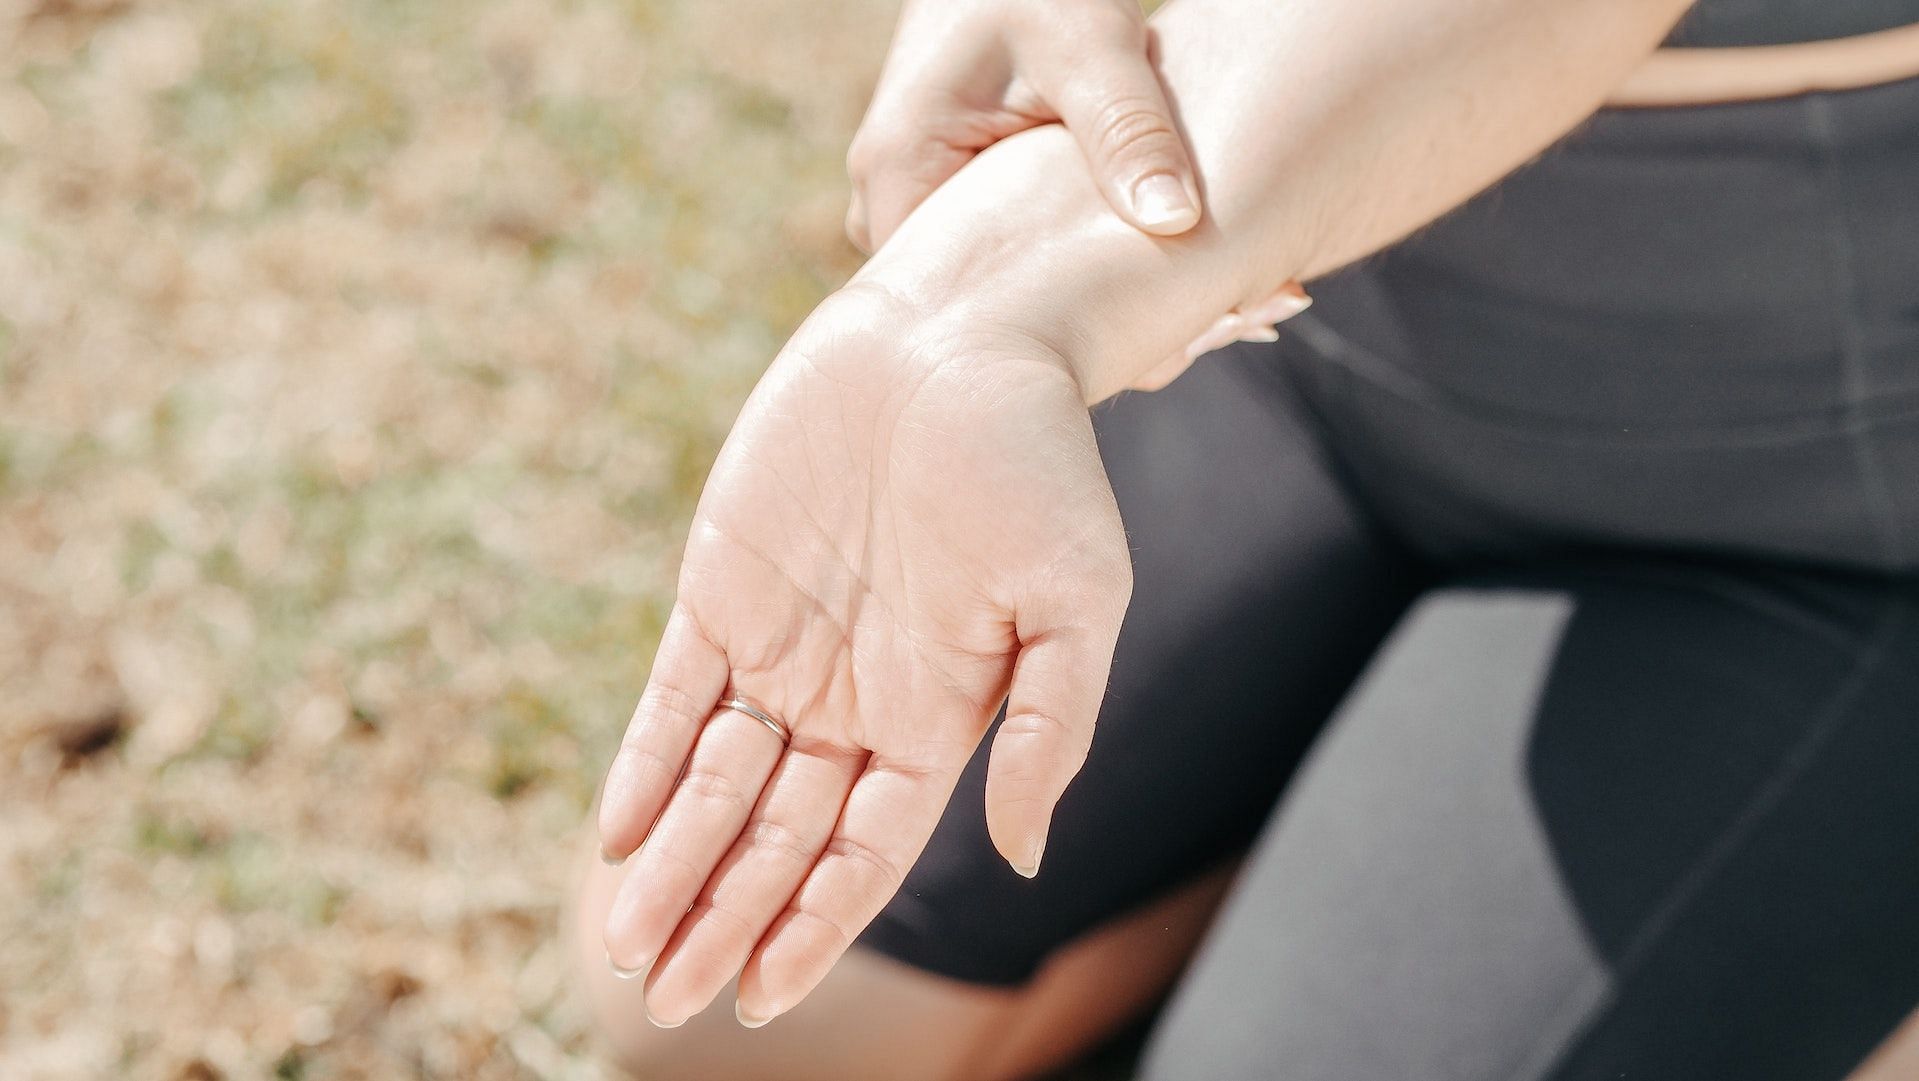 Numbness in hands can occur while sleeping. (Photo via Pexels/Kindel Media)